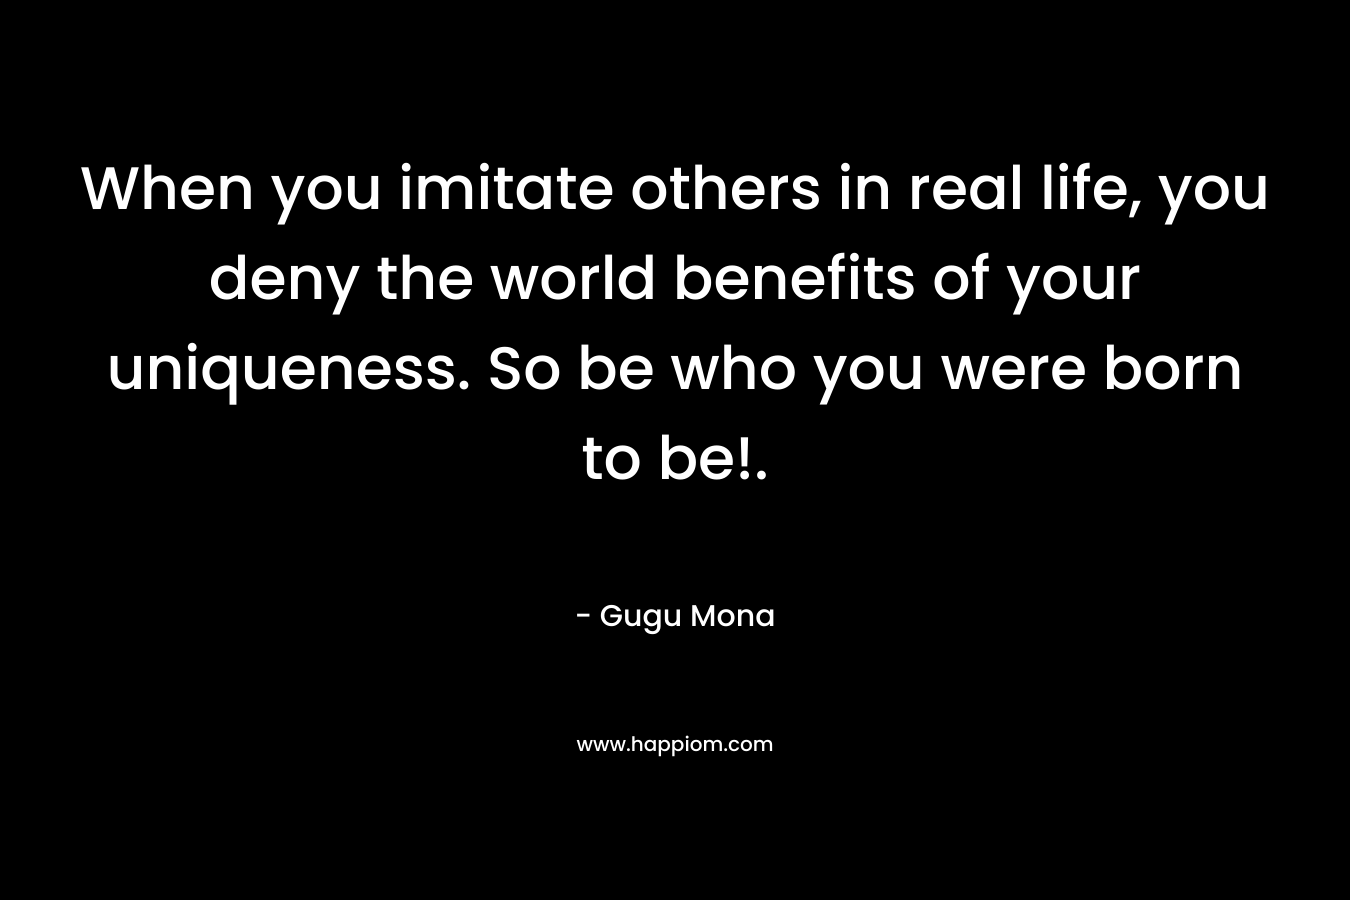 When you imitate others in real life, you deny the world benefits of your uniqueness. So be who you were born to be!. – Gugu Mona